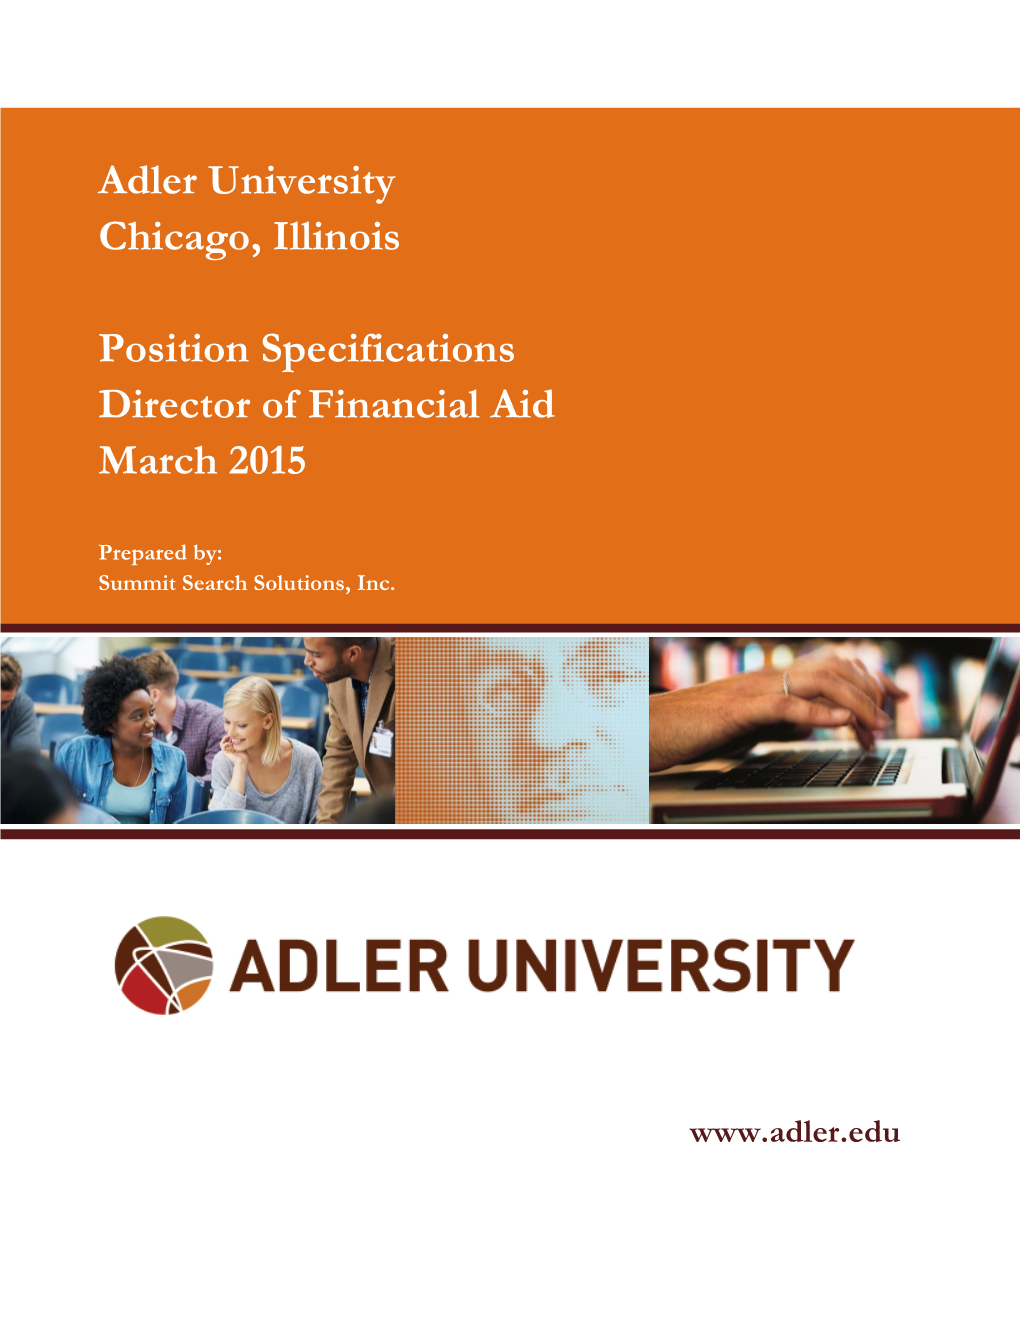 Adler University Chicago, Illinois Position Specifications Director Of